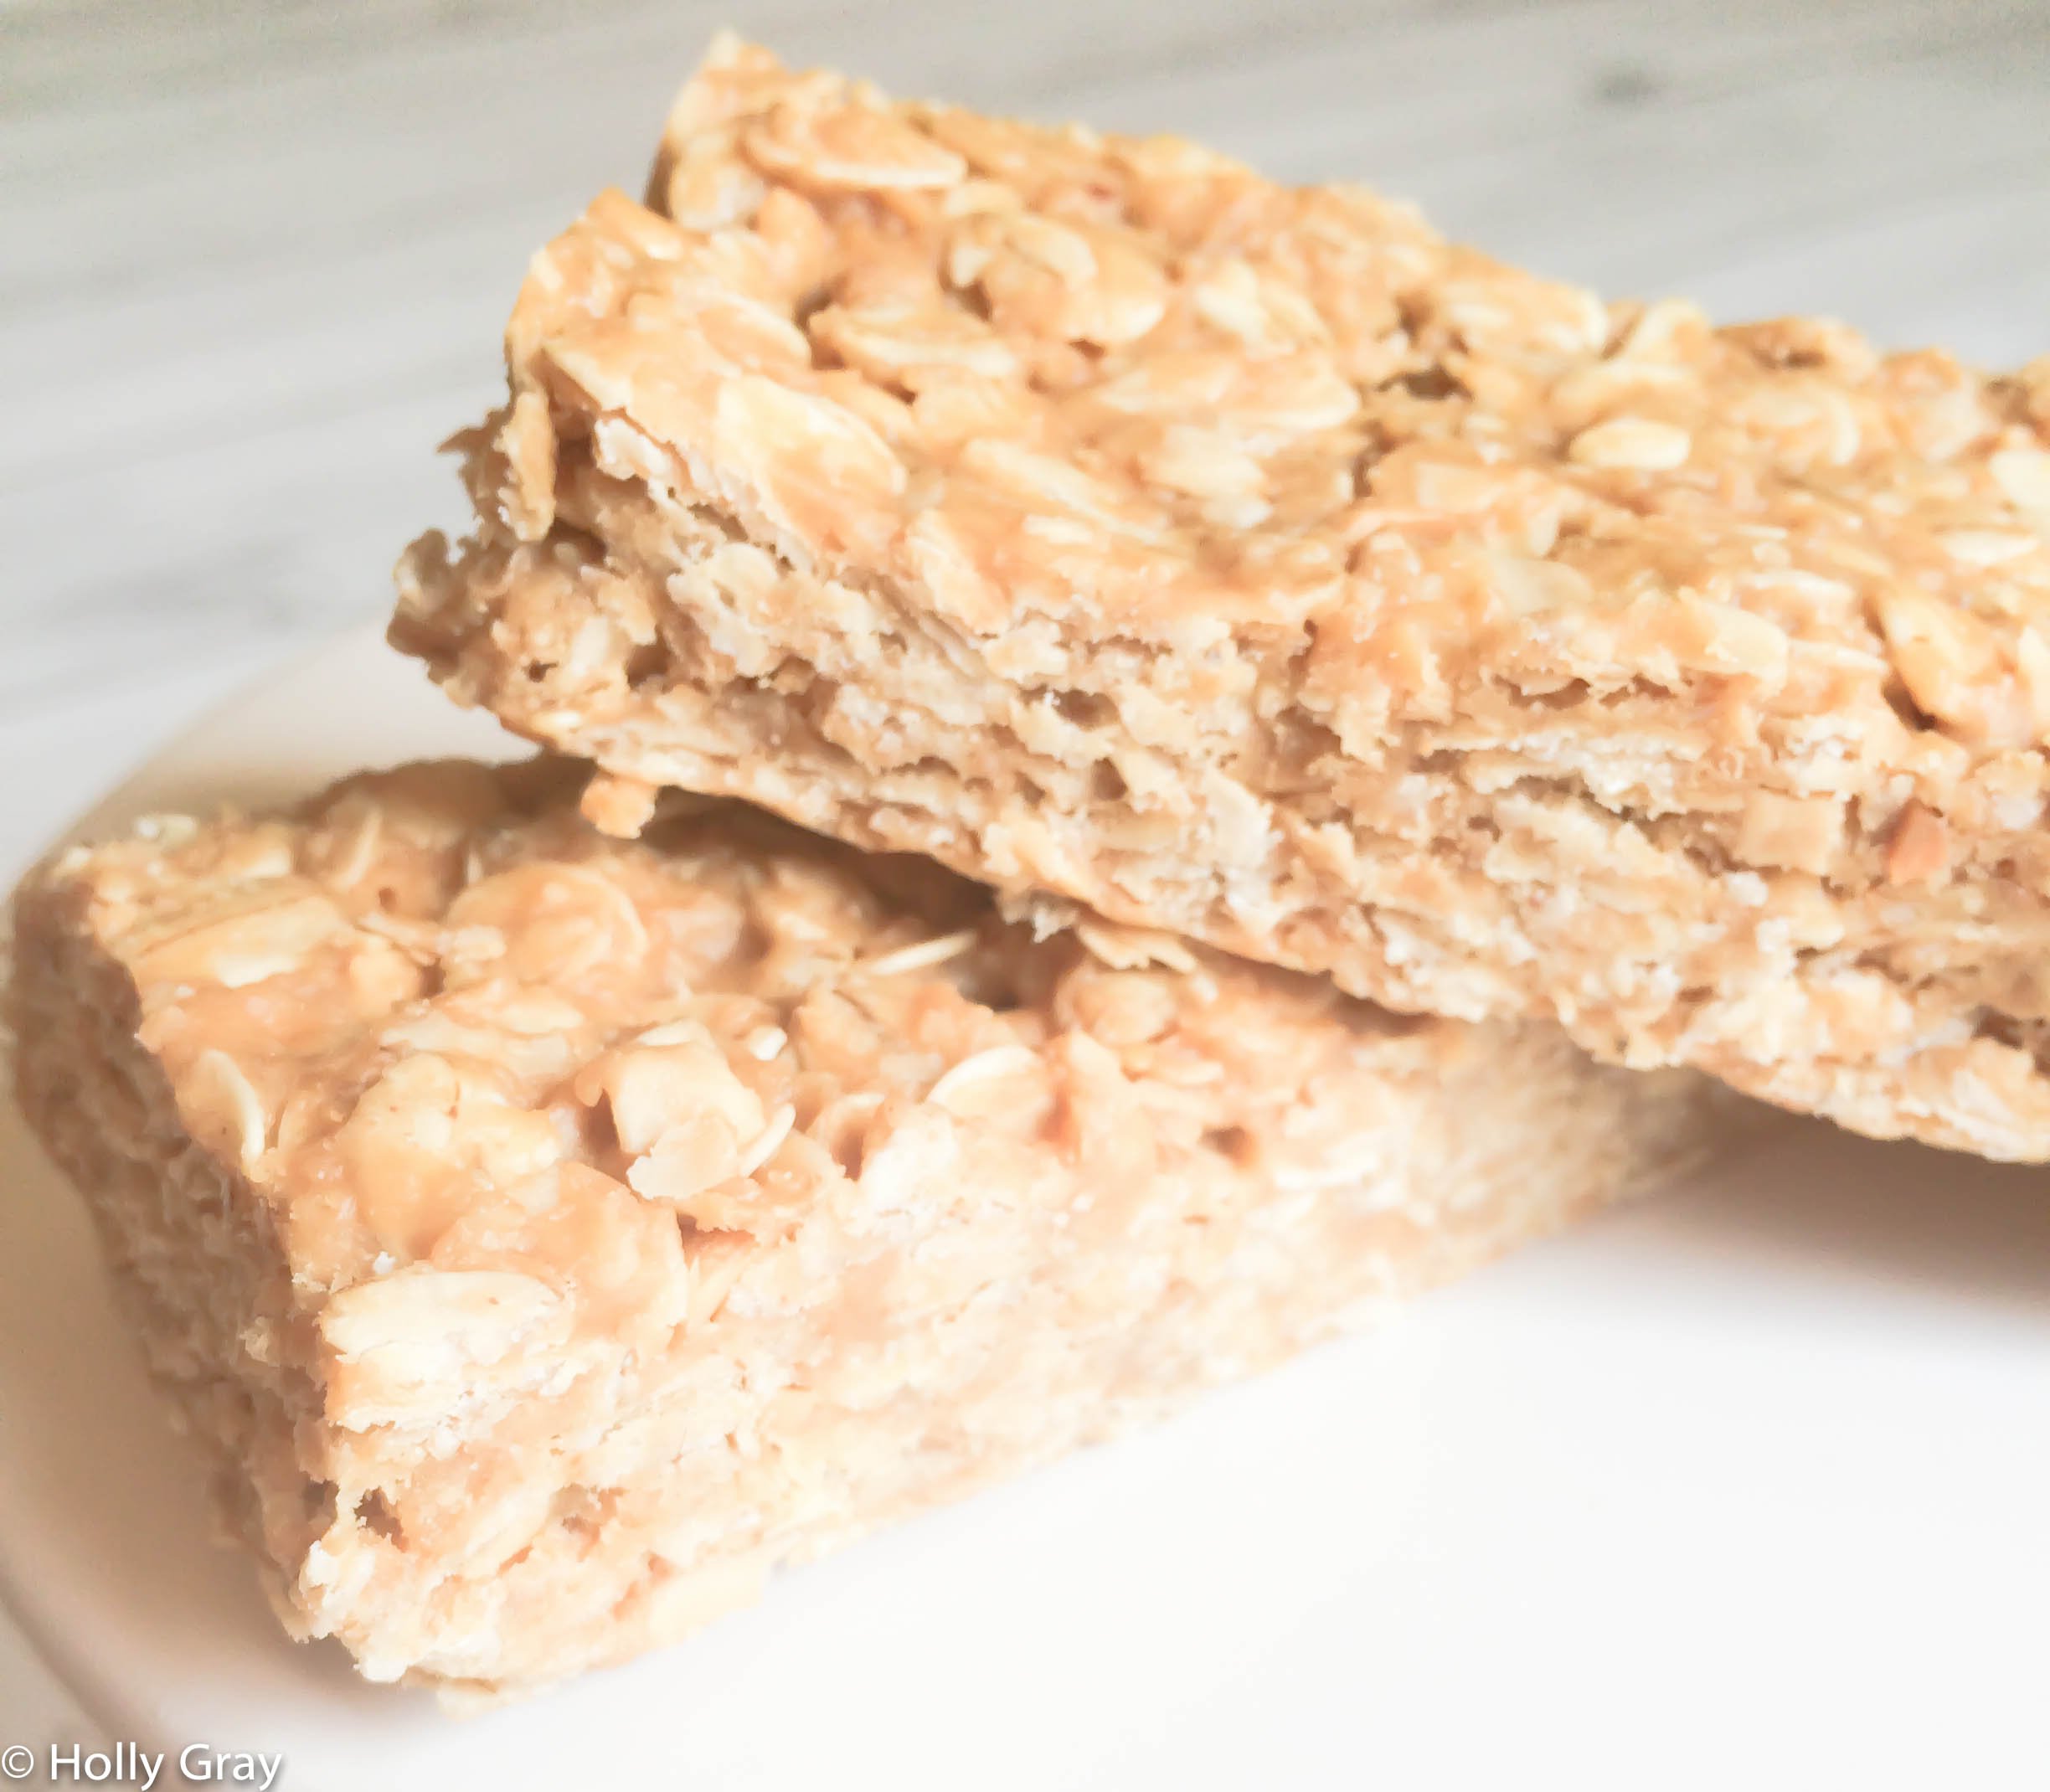 No-Bake Vegan Peanut Butter Honey and Oatmeal Bars - Just 3 ingredients and no baking required. The perfect on-the-go breakfast or after-school snack! via @thiswifecooks